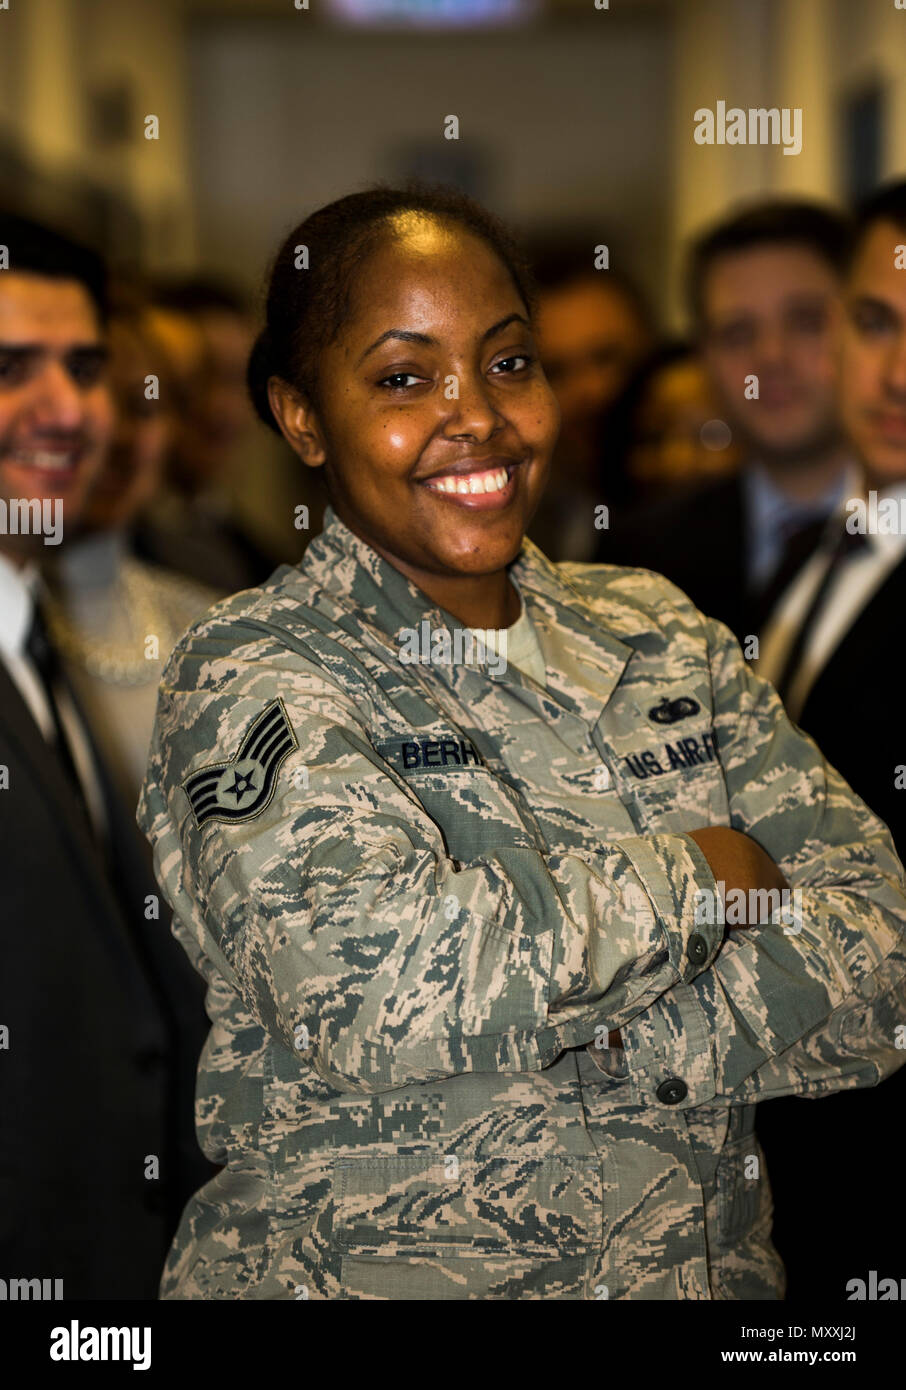 U.S. Air Force Staff Sgt. Demetria Berhanu, Air Force Office of Special  Investigations NCO in charge of administration, poses at Spangdahlem Air  Base, Germany, August 30, 2016. Berhanu was recognized as Spangdahlem's